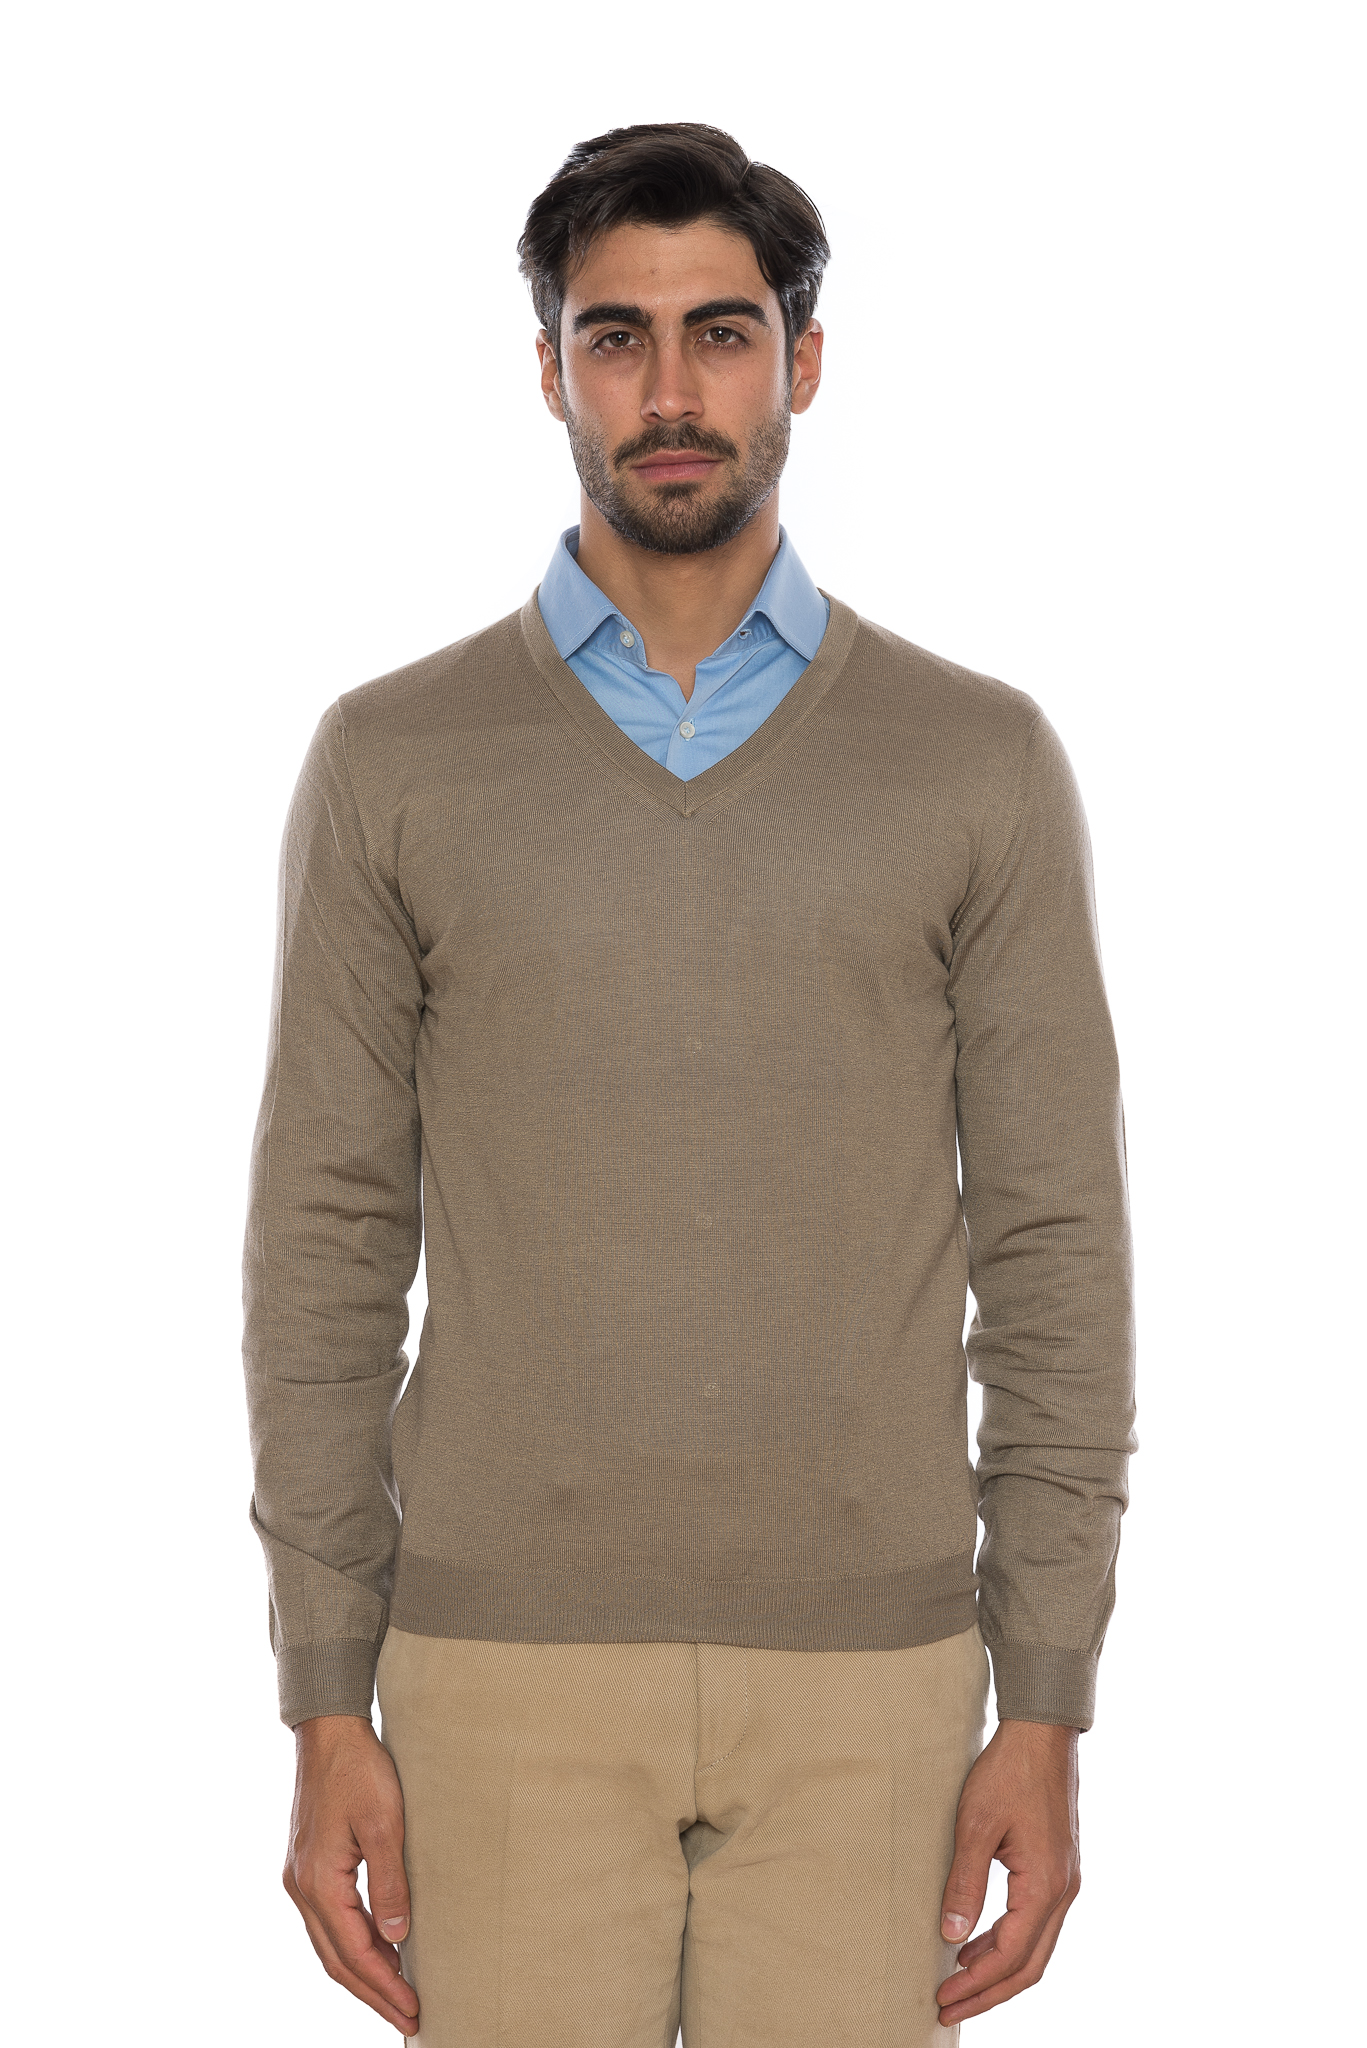 450$ BELVEST Sweater Dove Gray Cashmere Silk Made in Italy Slim Fit ...